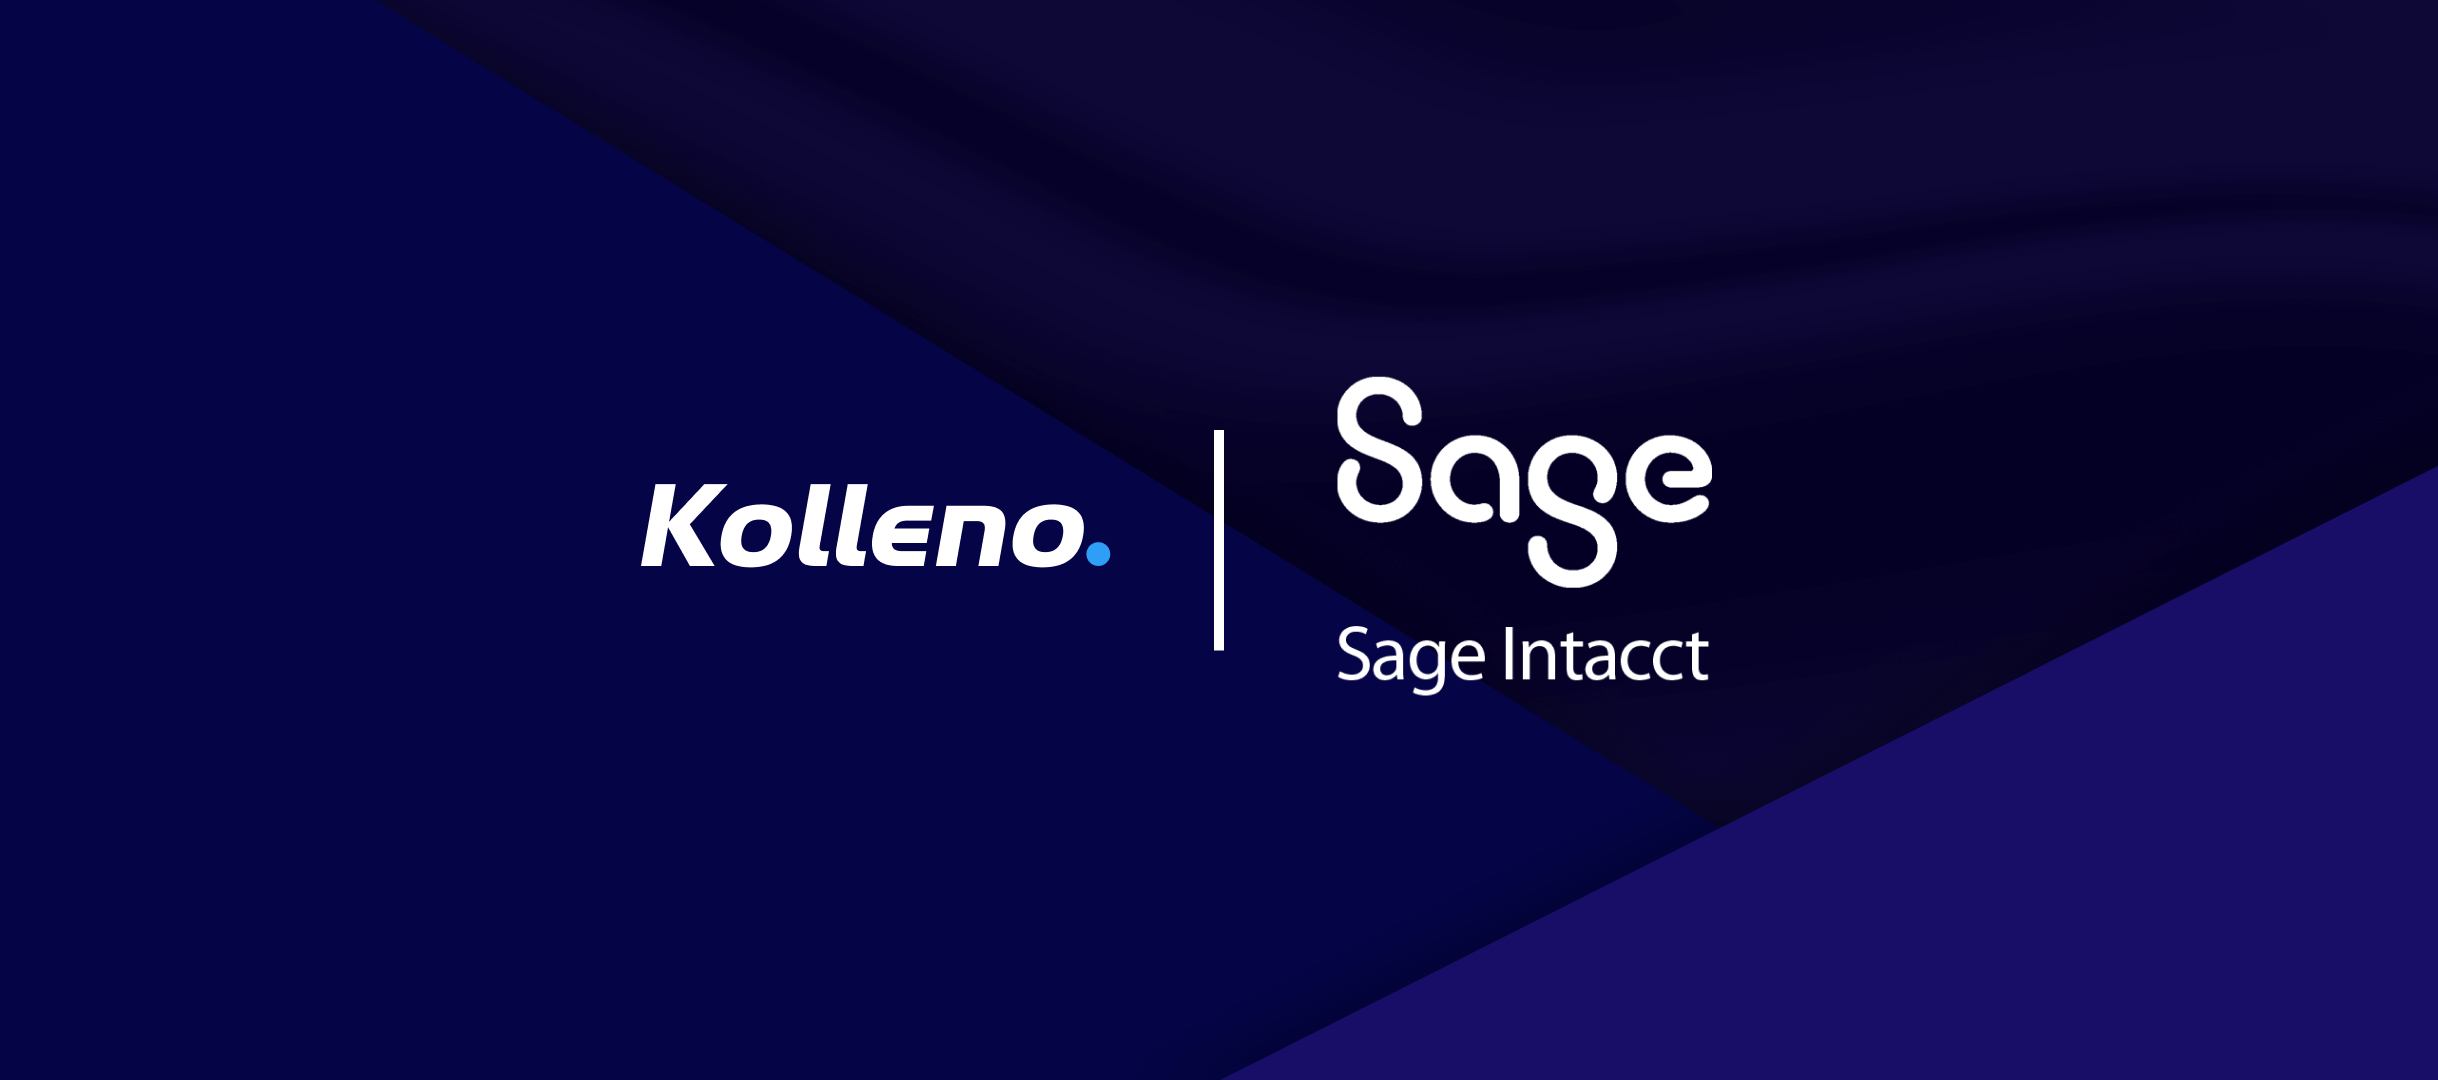 Kolleno Announces Integration With Sage Intacct